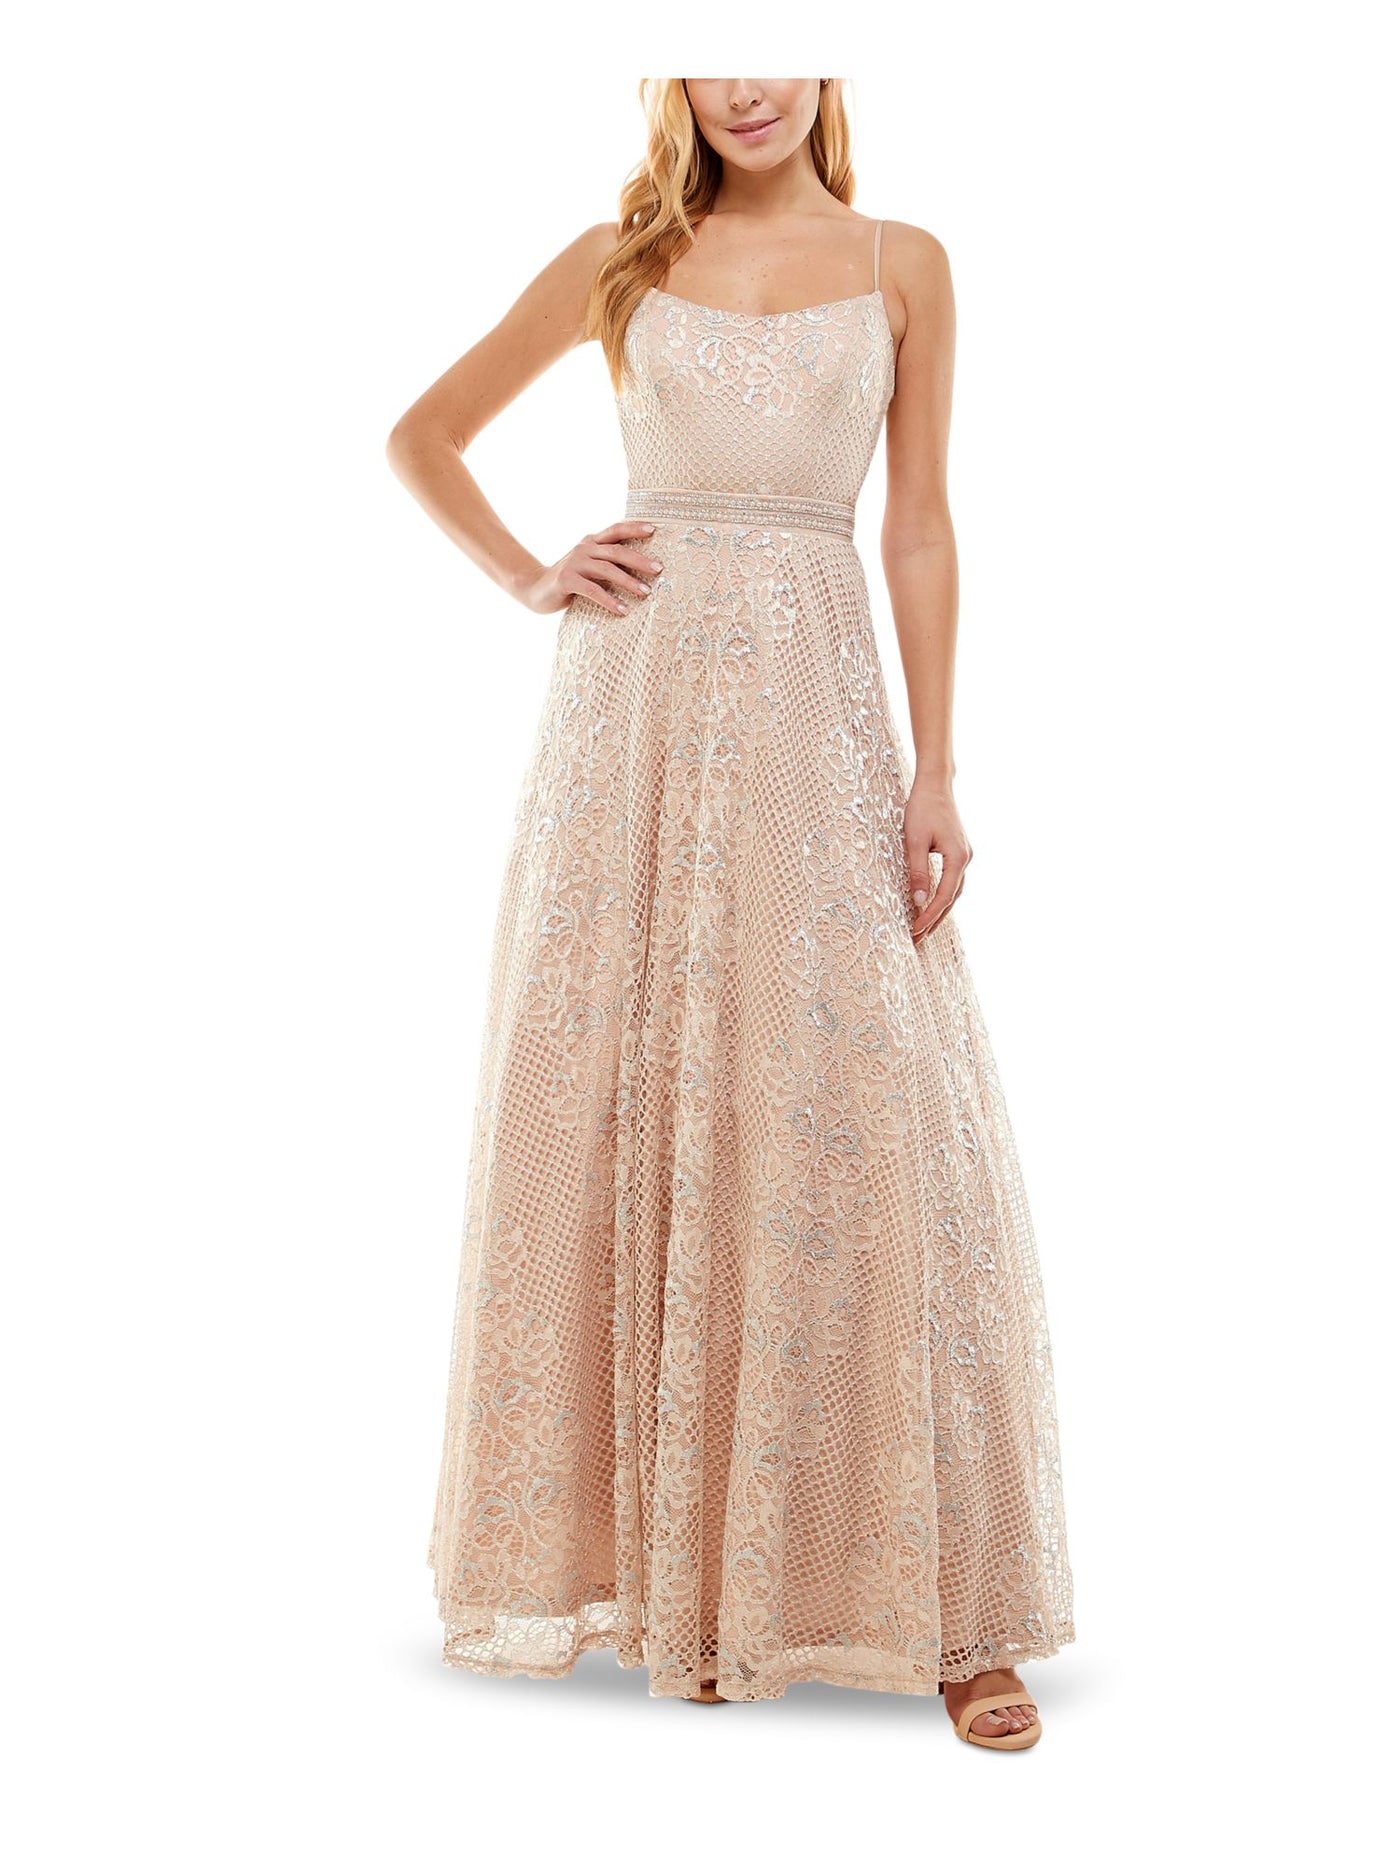 CITY STUDIO Womens Beige Zippered Metallic Lace Overlay Lined Floral Spaghetti Strap Scoop Neck Full-Length Cocktail Gown Dress Juniors 5